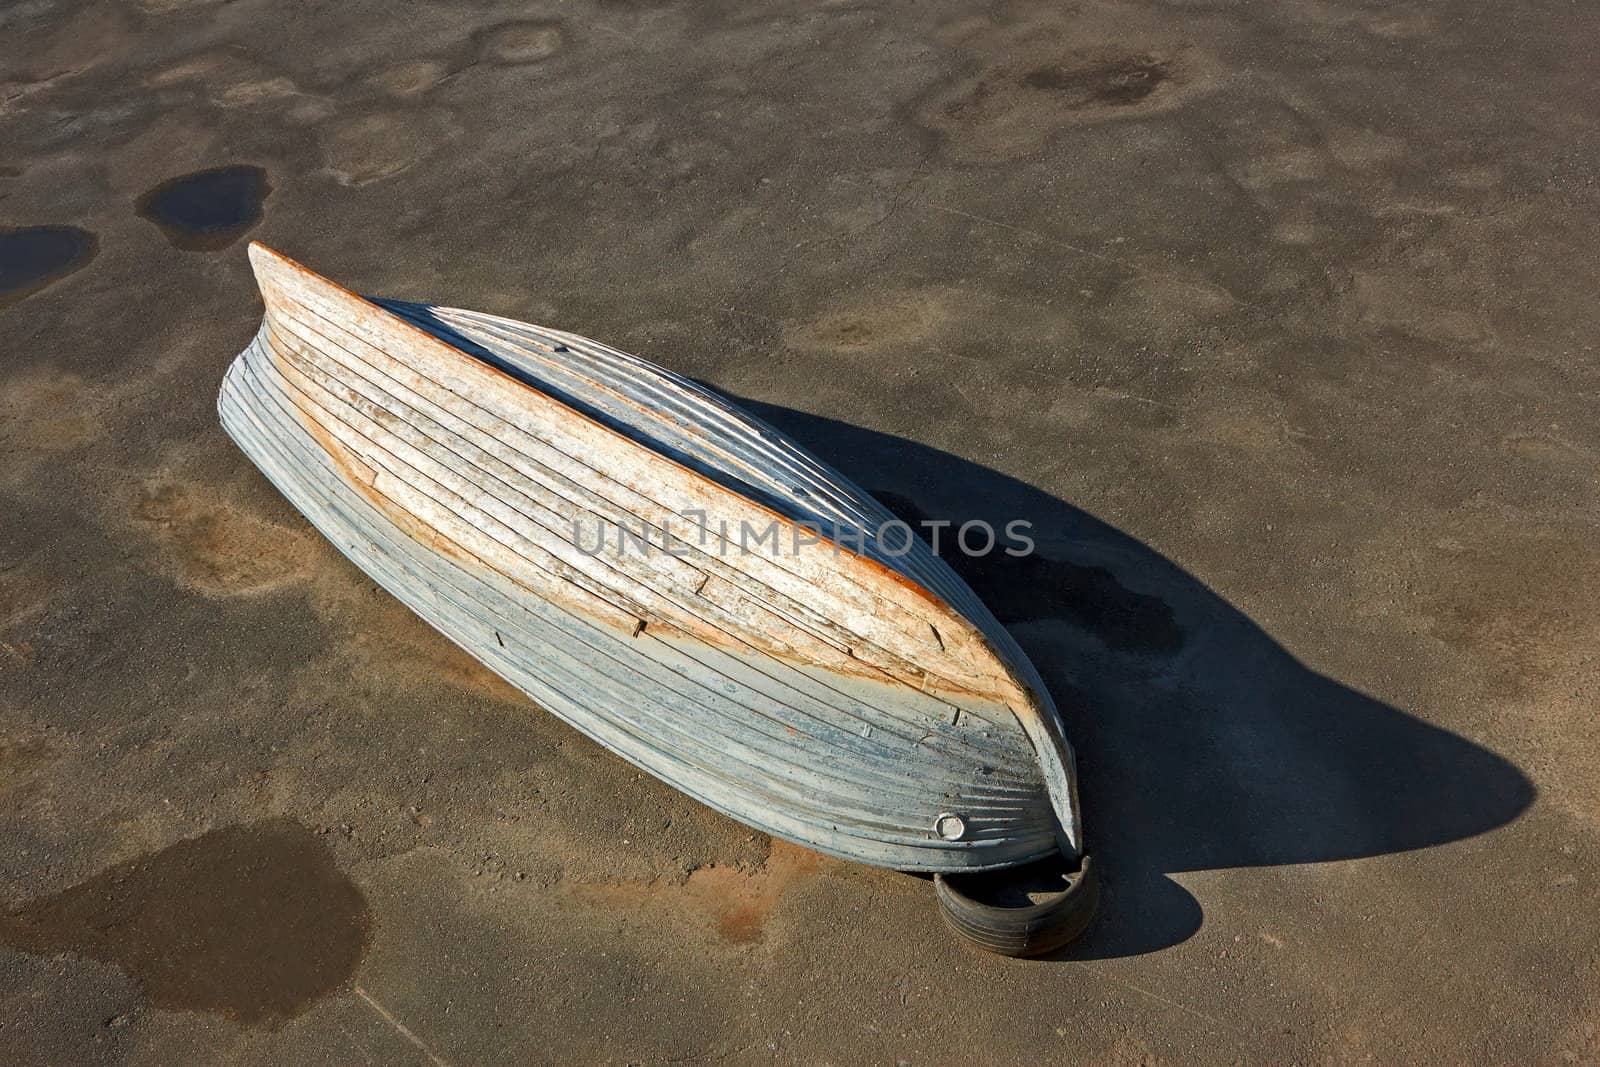 Wooden boat inverted bottom up by qiiip